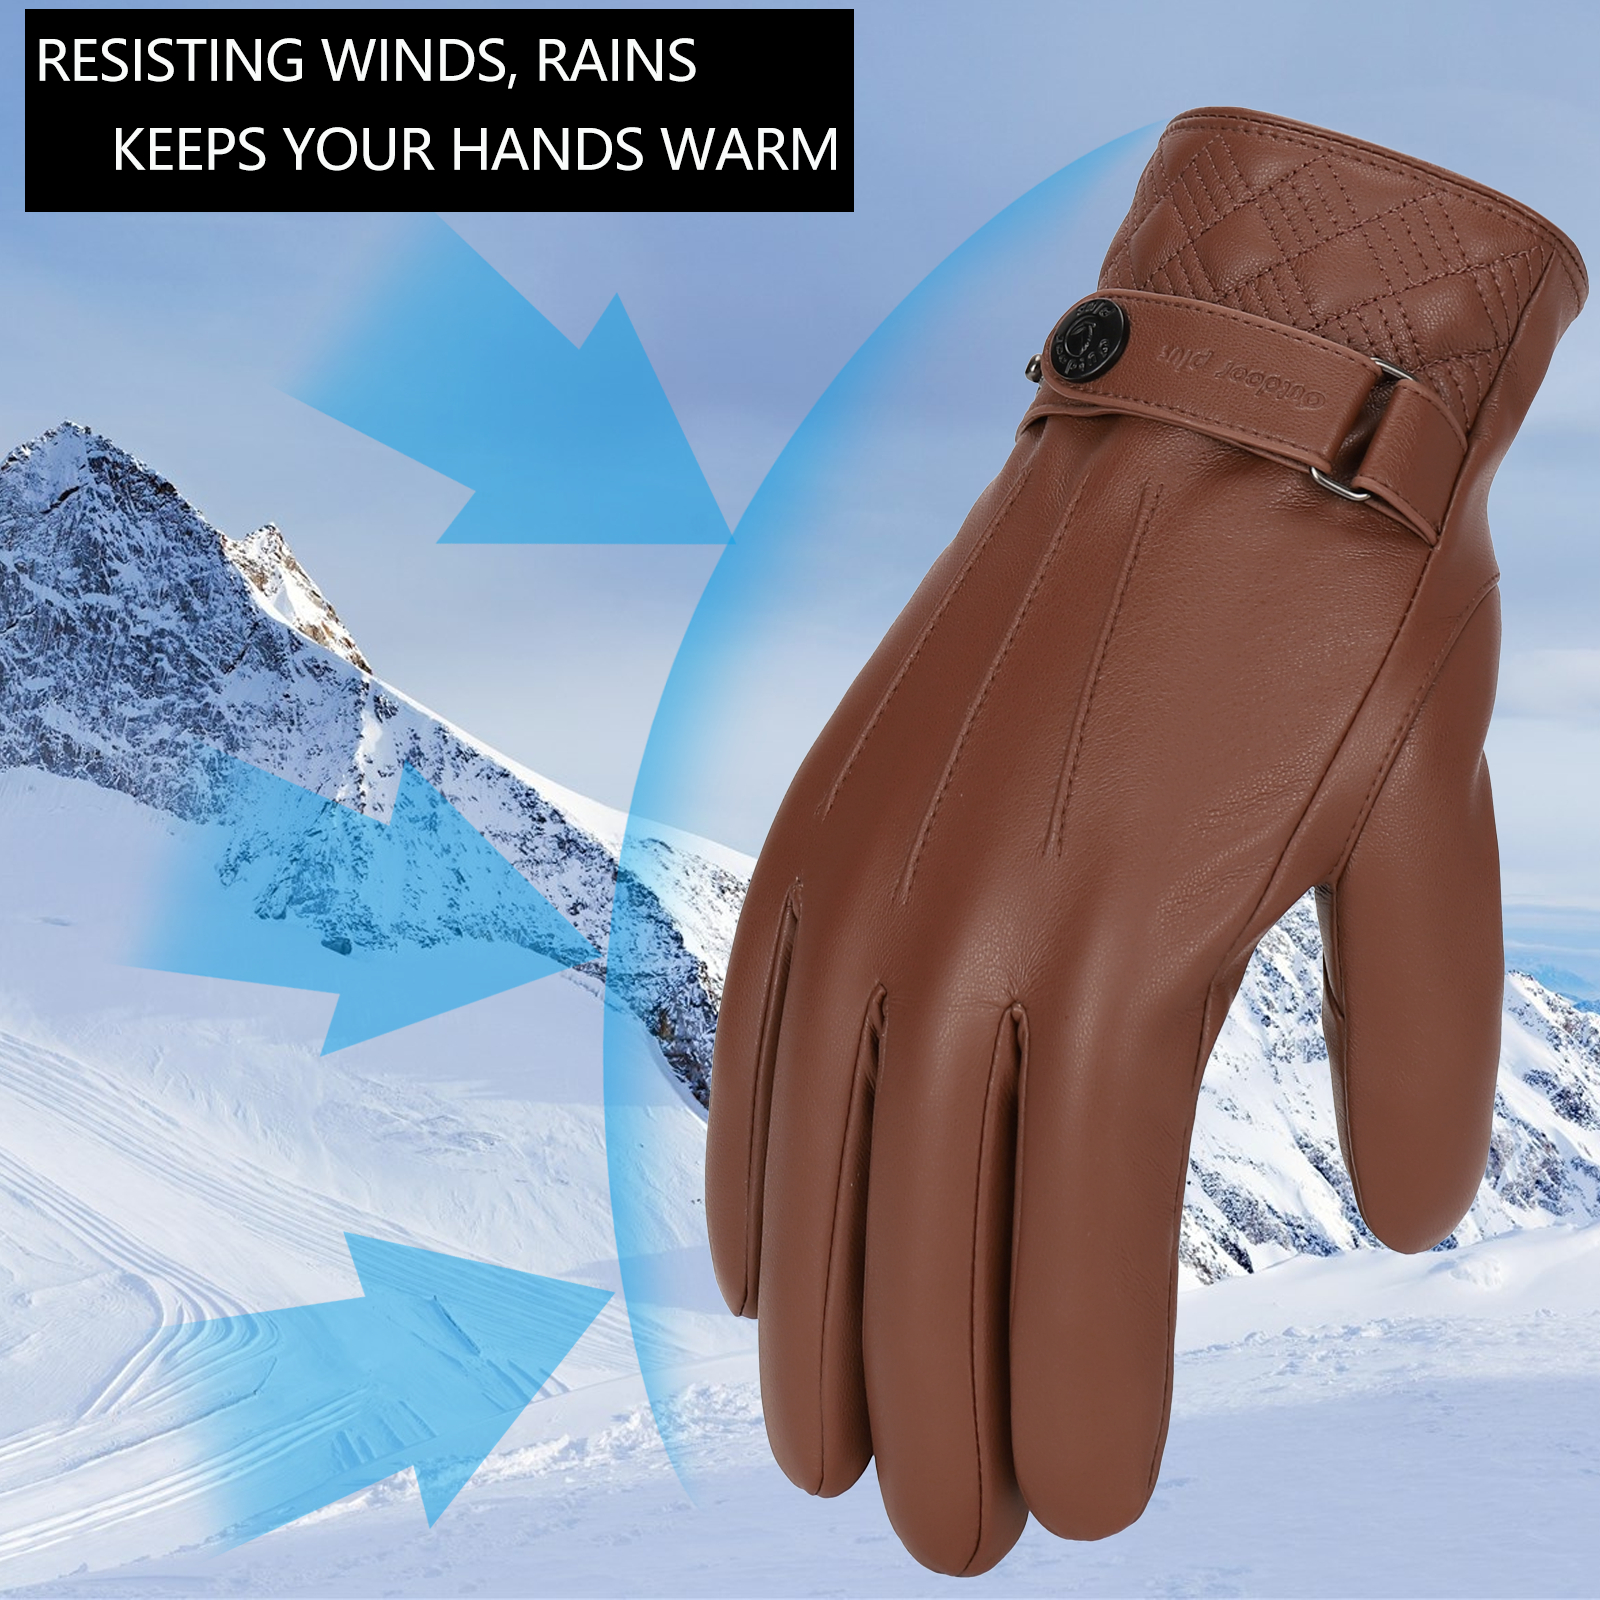 Leather Gloves for Men, Warm Wool Lined PU Leather Winter Gloves Touchscreen Texting,Driving Gloves Men Waterproof - image 4 of 7